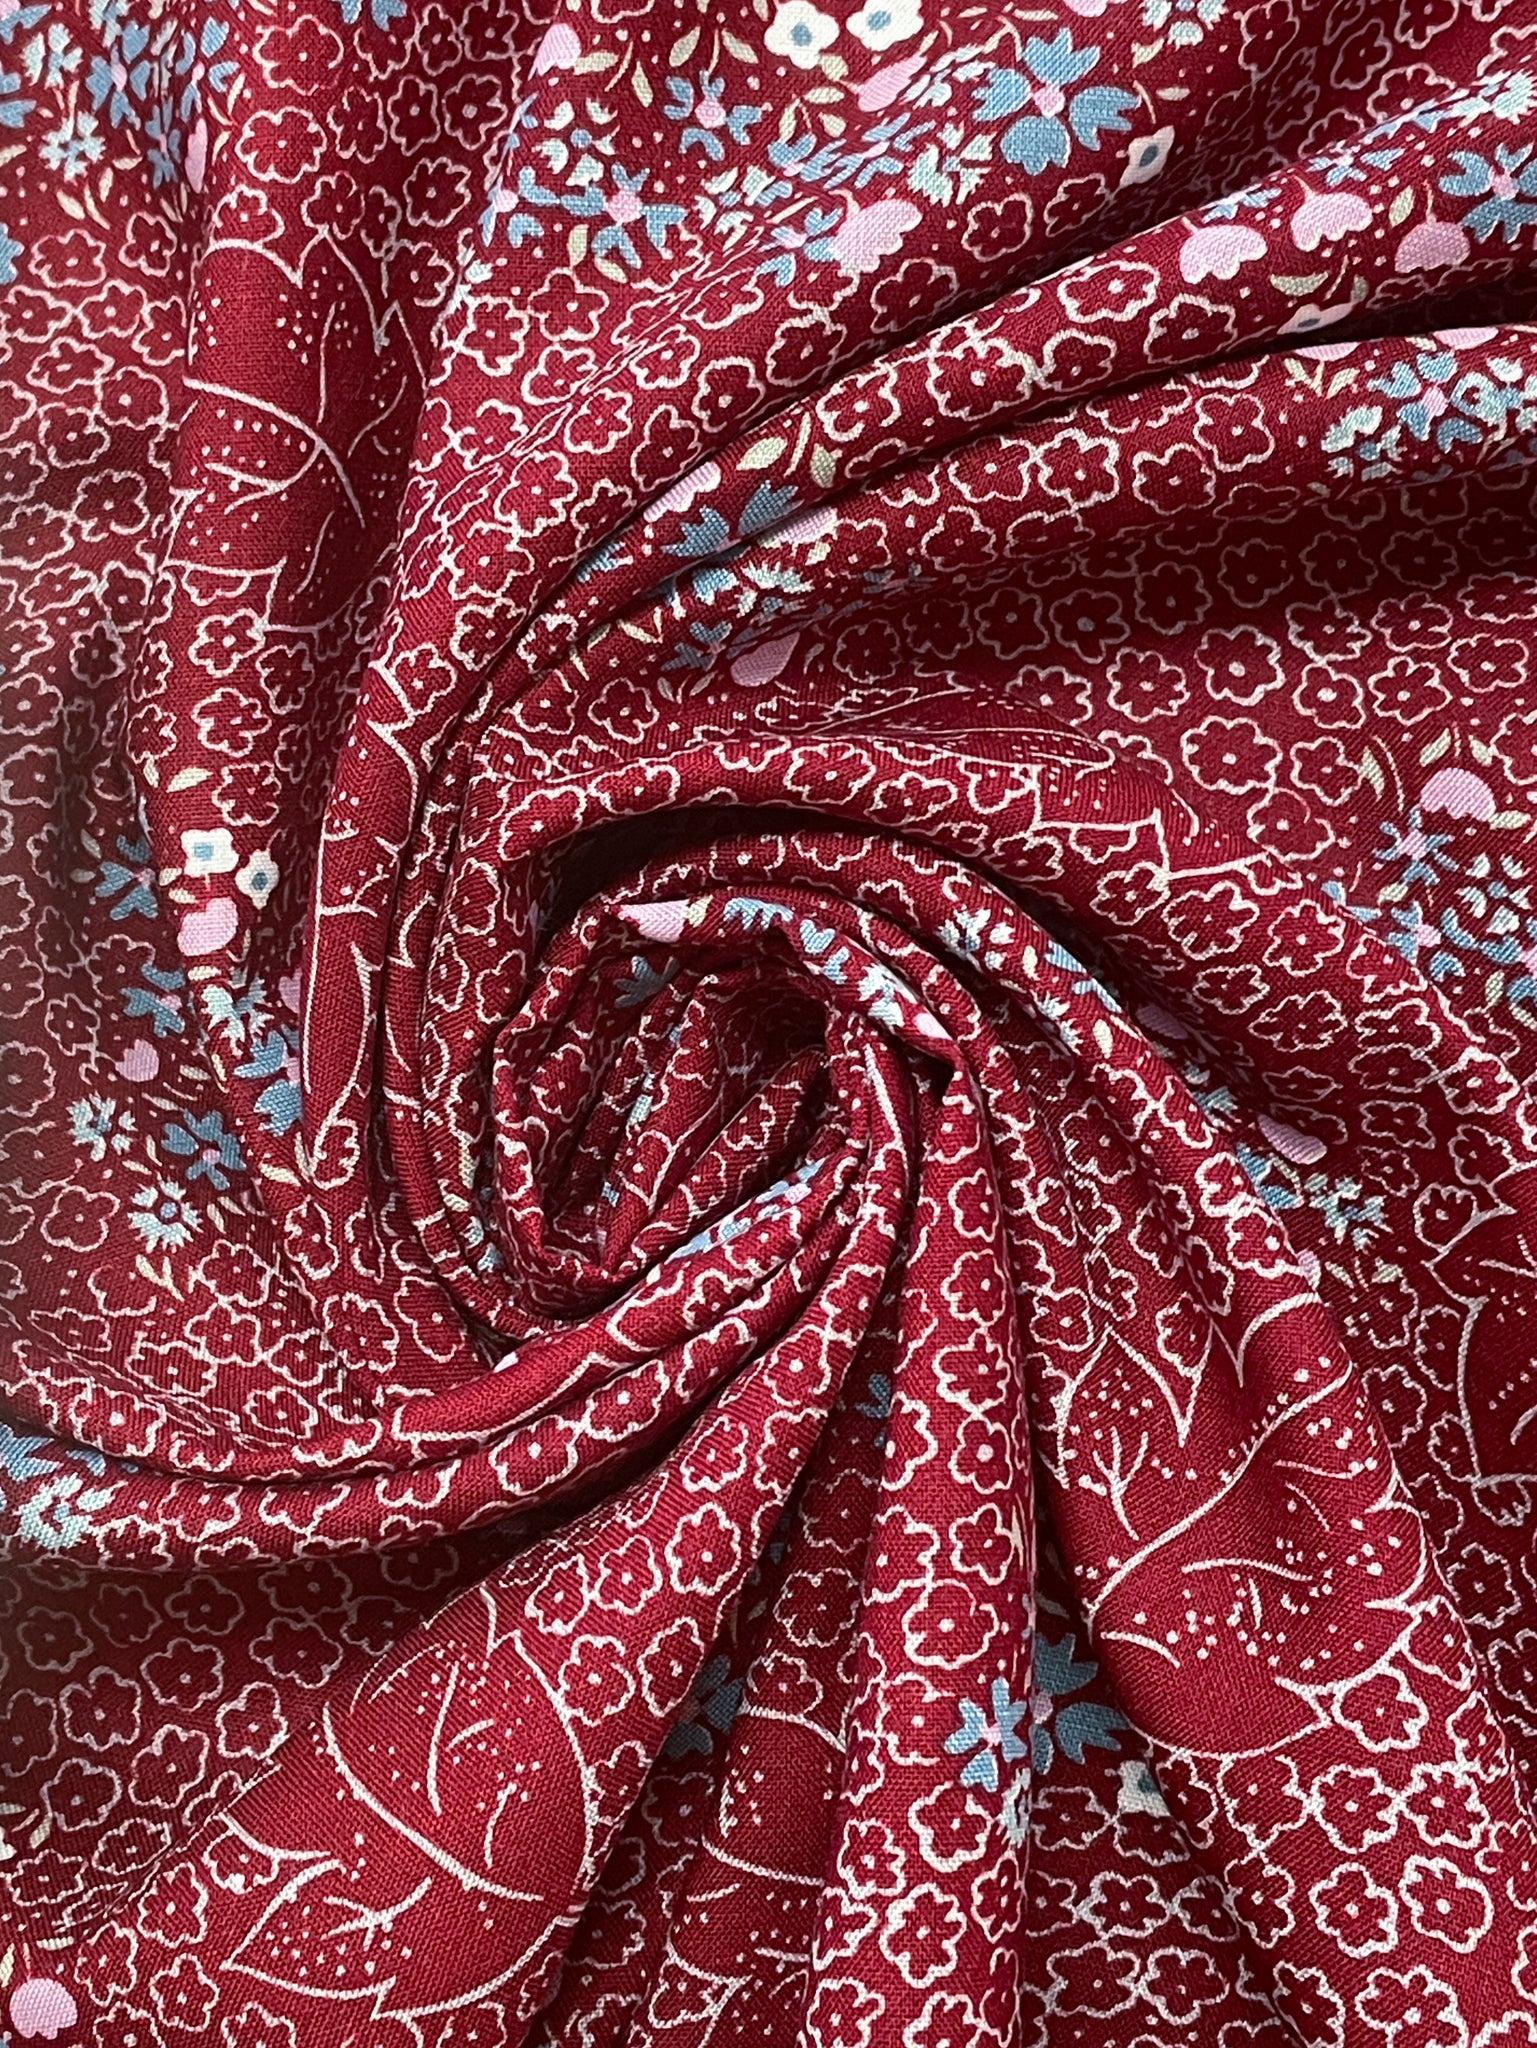 3 Rayon Vintage - Dark Red with Blue, Aqua and Pink Flowers